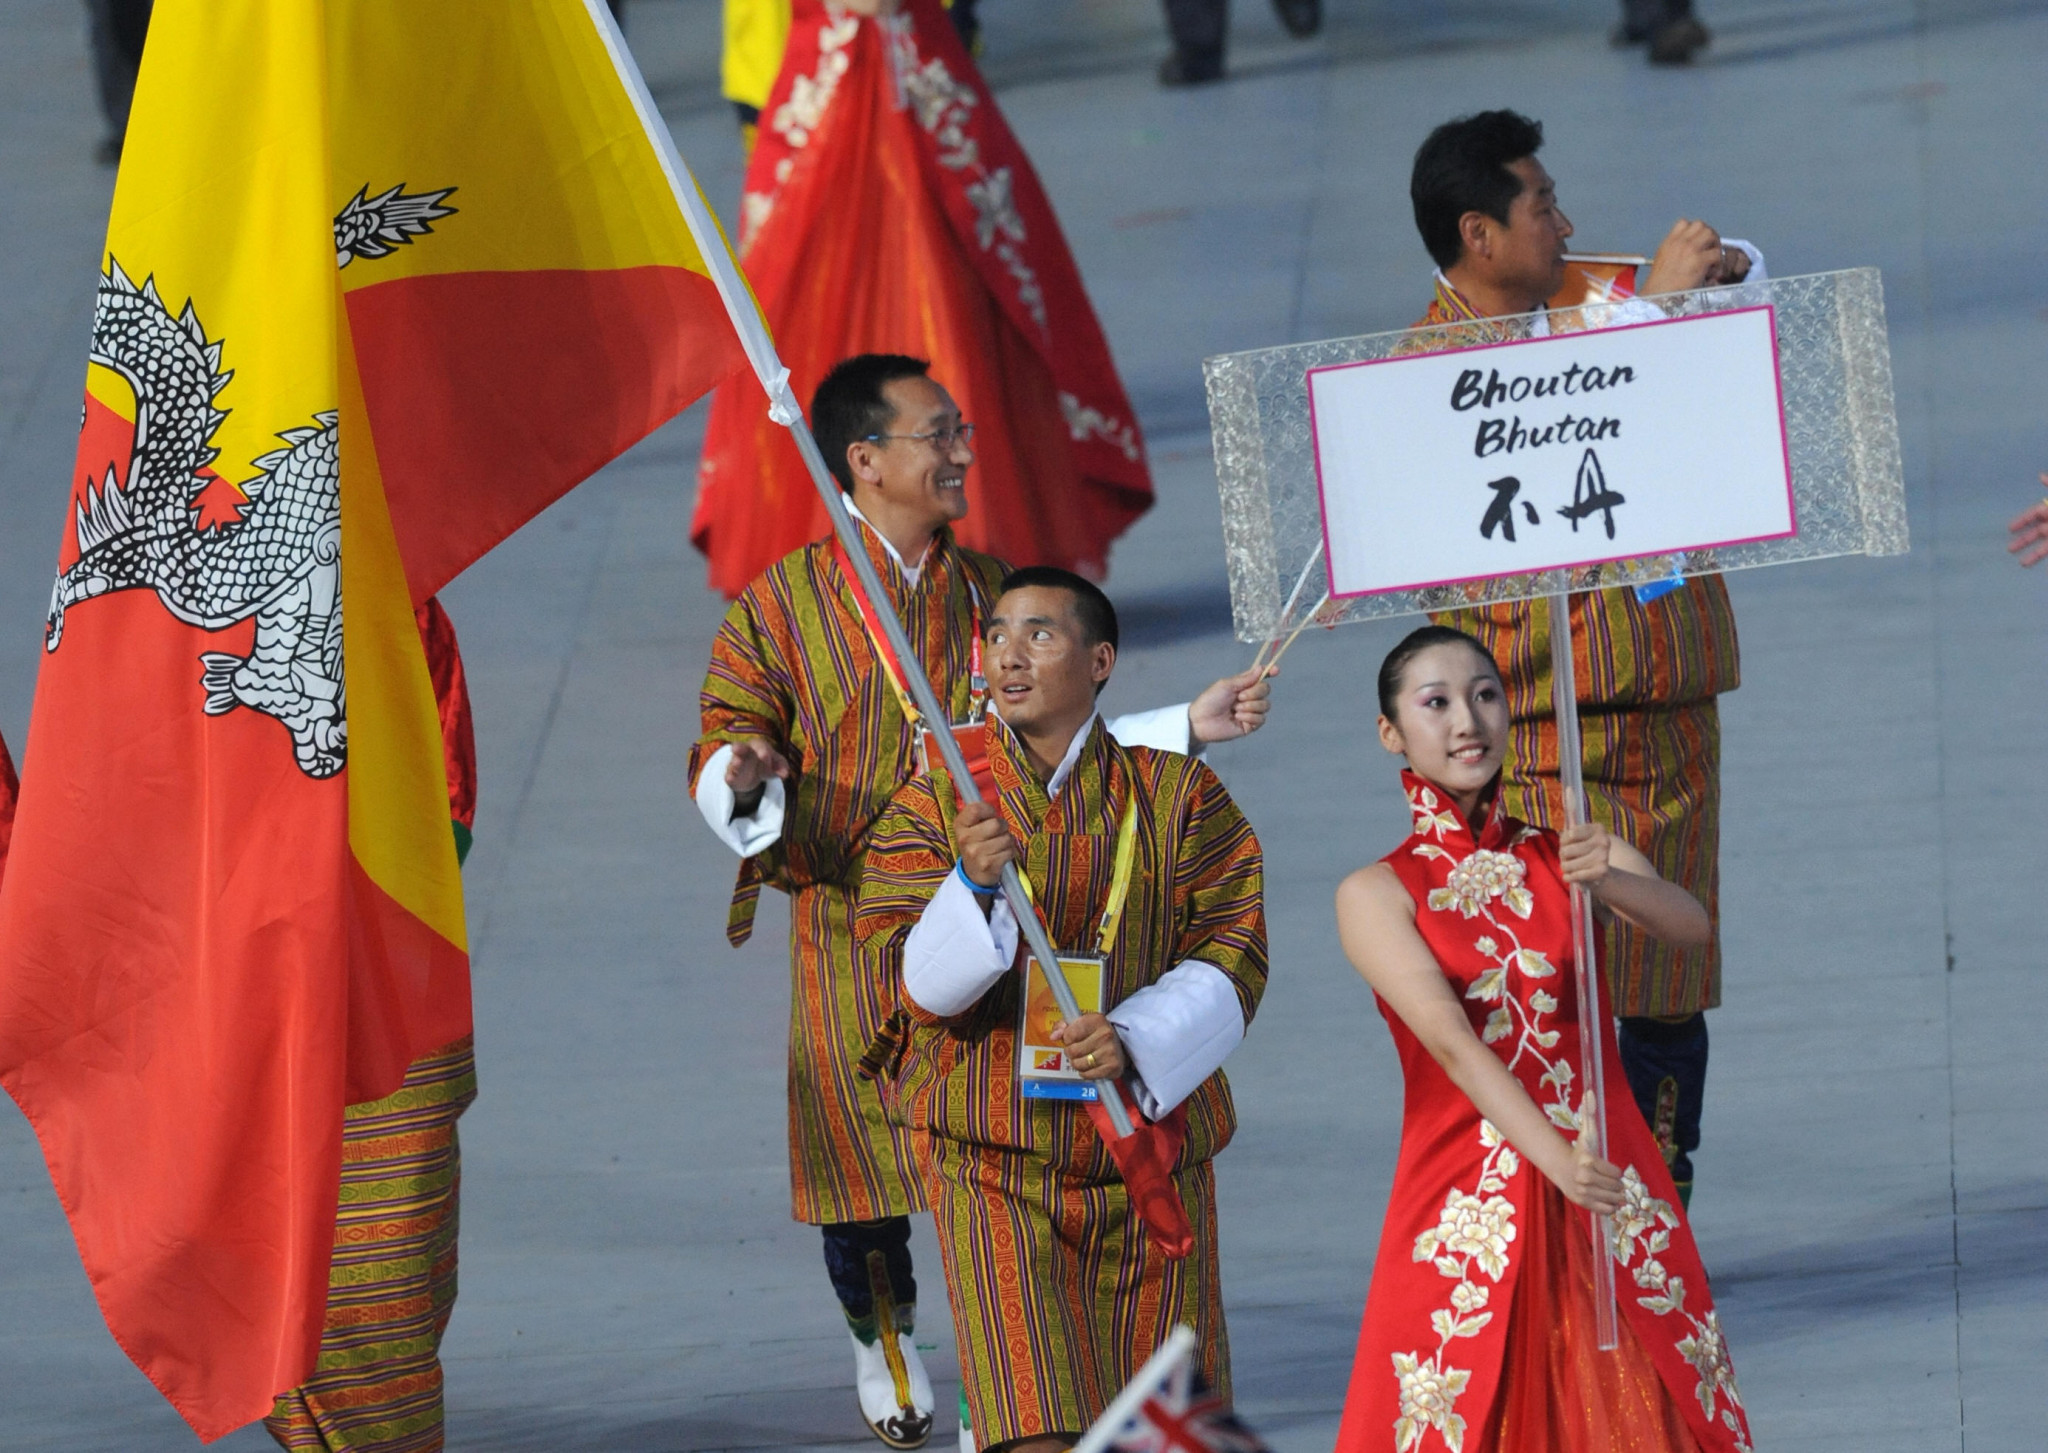 Bhutan is set to become one of the newest members of the WBSC ©Getty Images